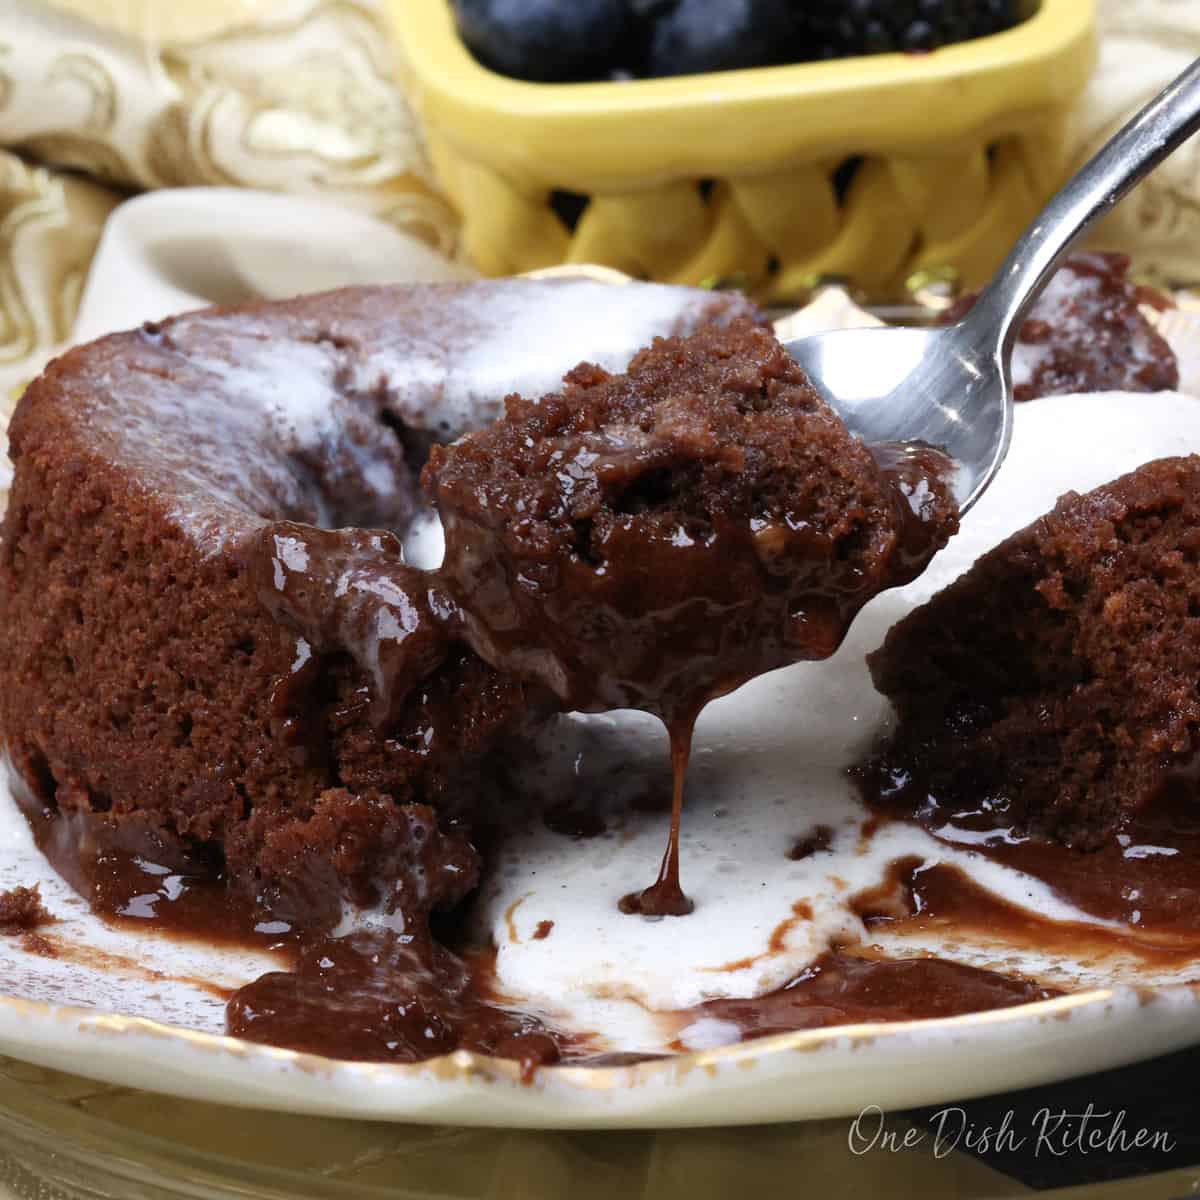 cutting into a chocolate lava cake with the melted chocolate dripping off the spoon.